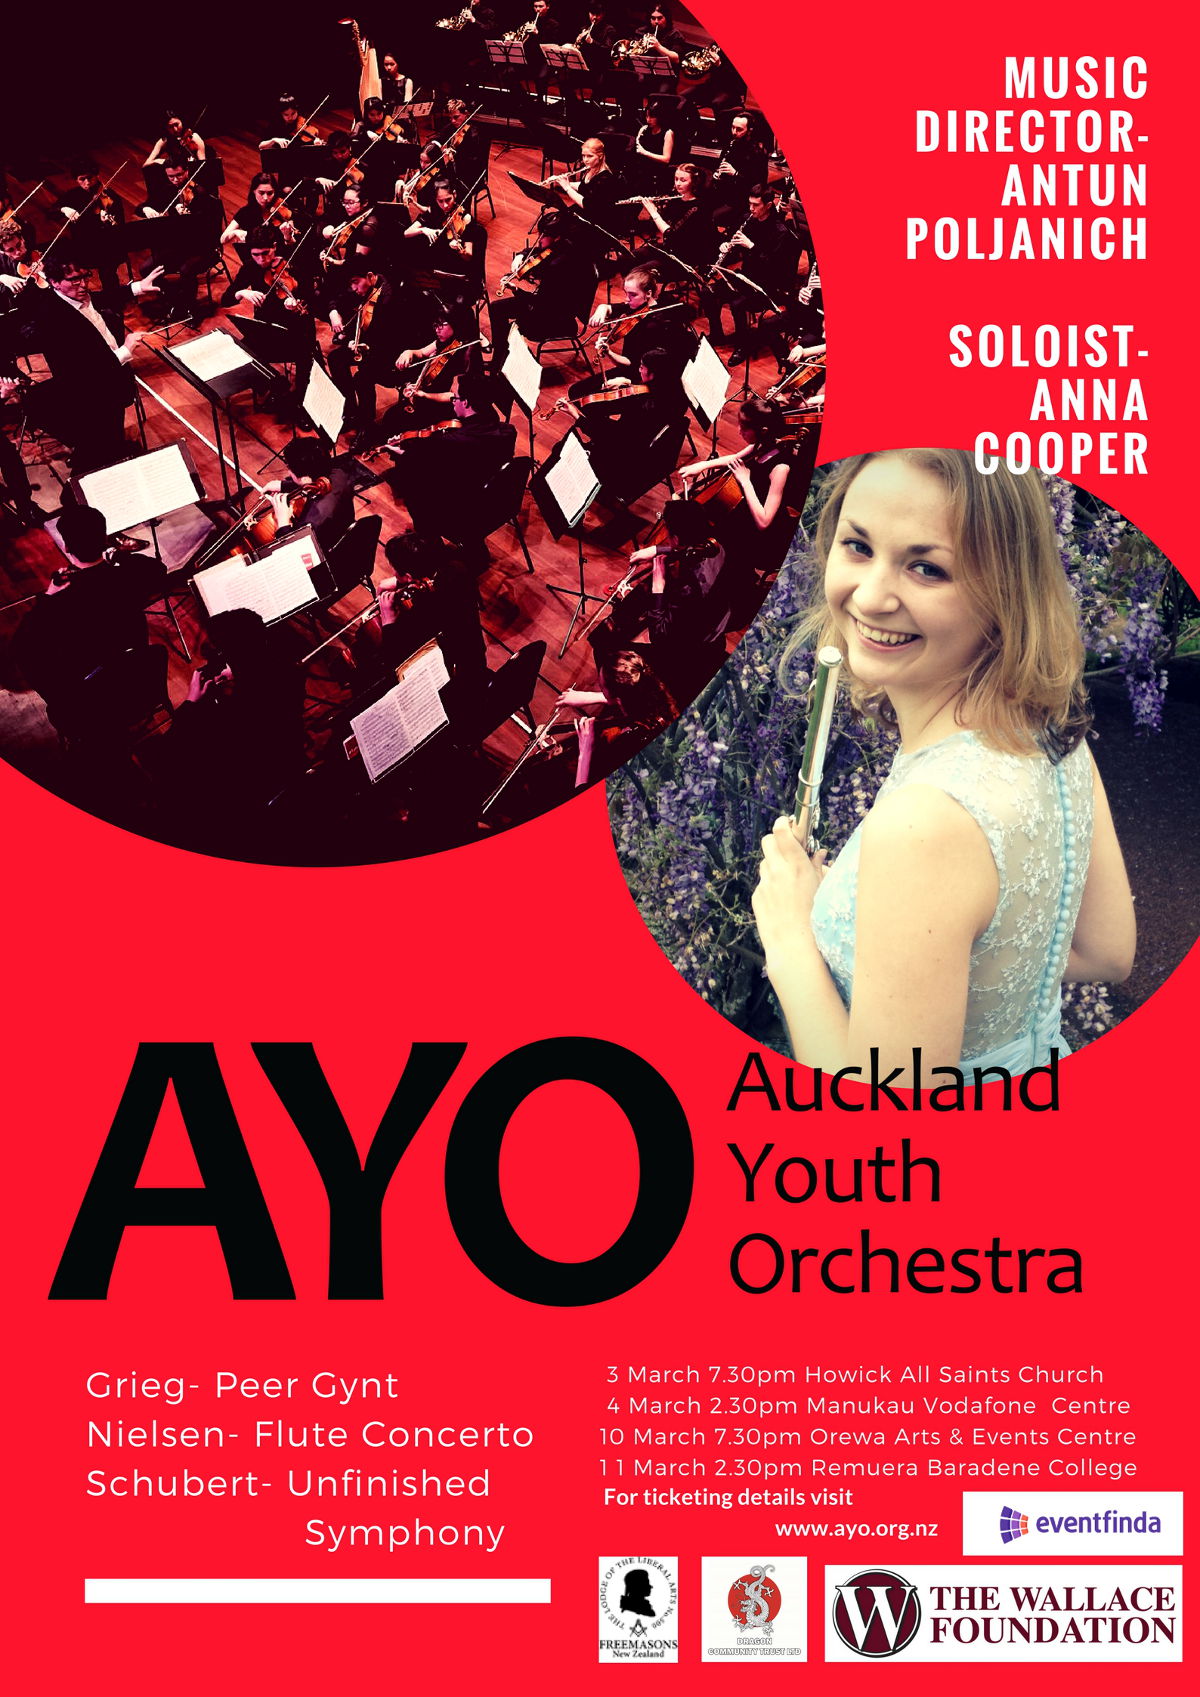 AUCKLAND YOUTH ORCHESTRA